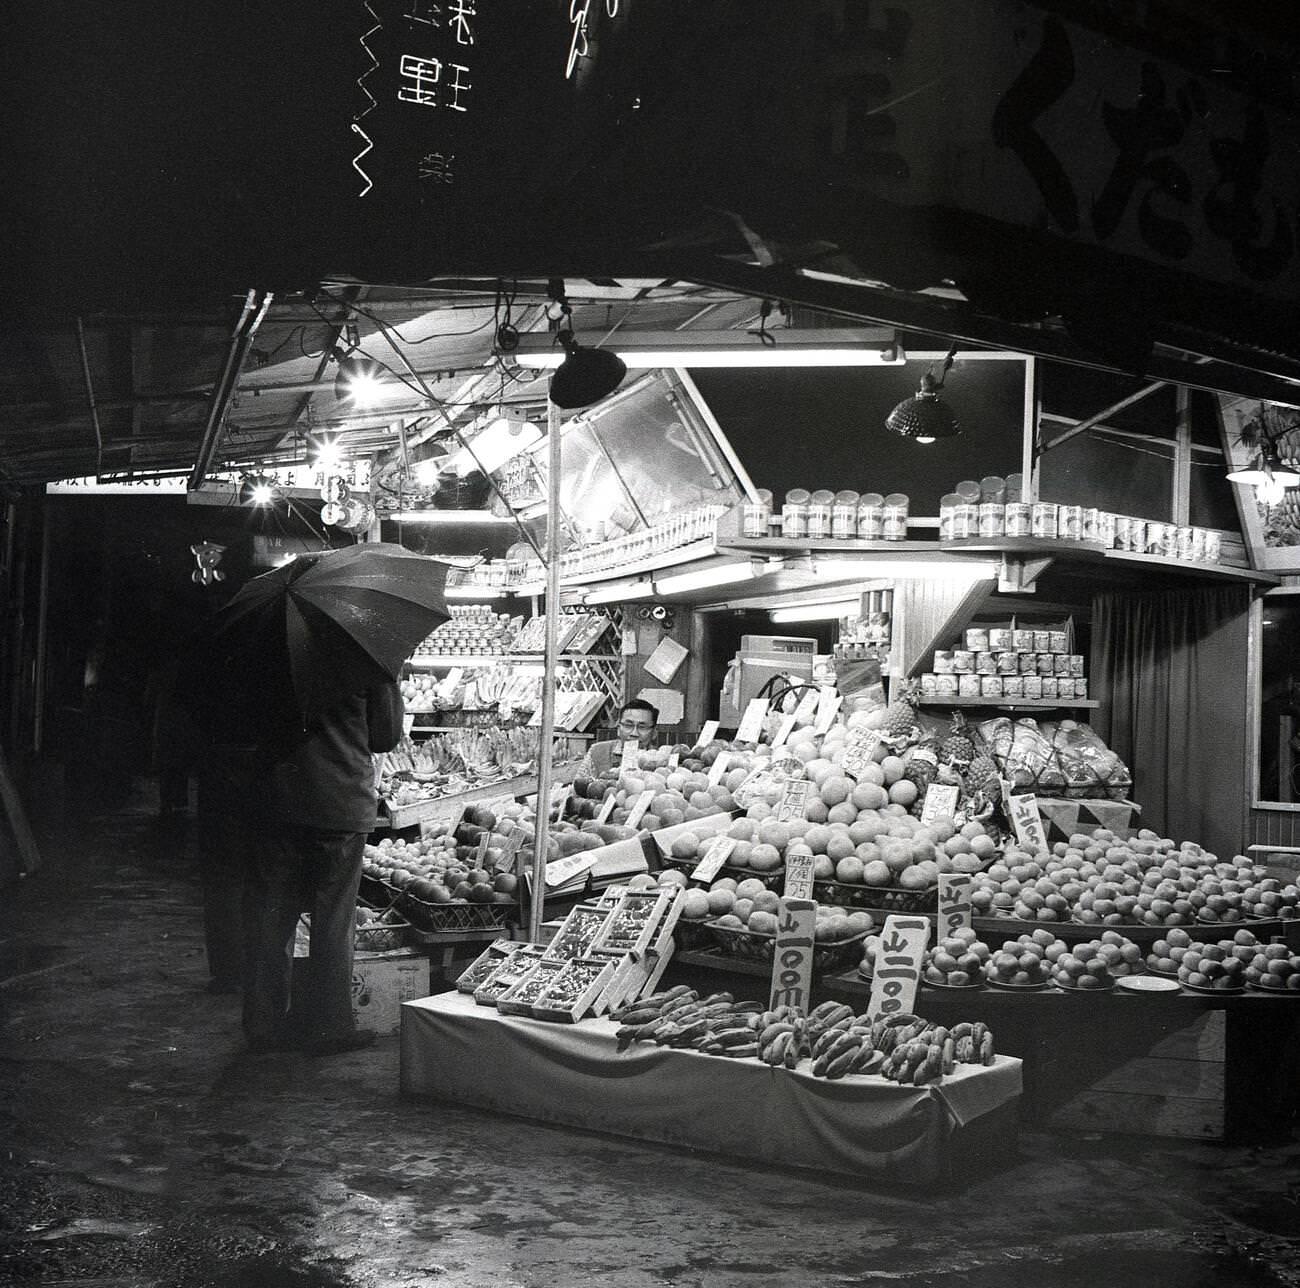 A wet evening and a man with an umbrella at an outdoor street stall selling fruit in Tokyo, 1950s.